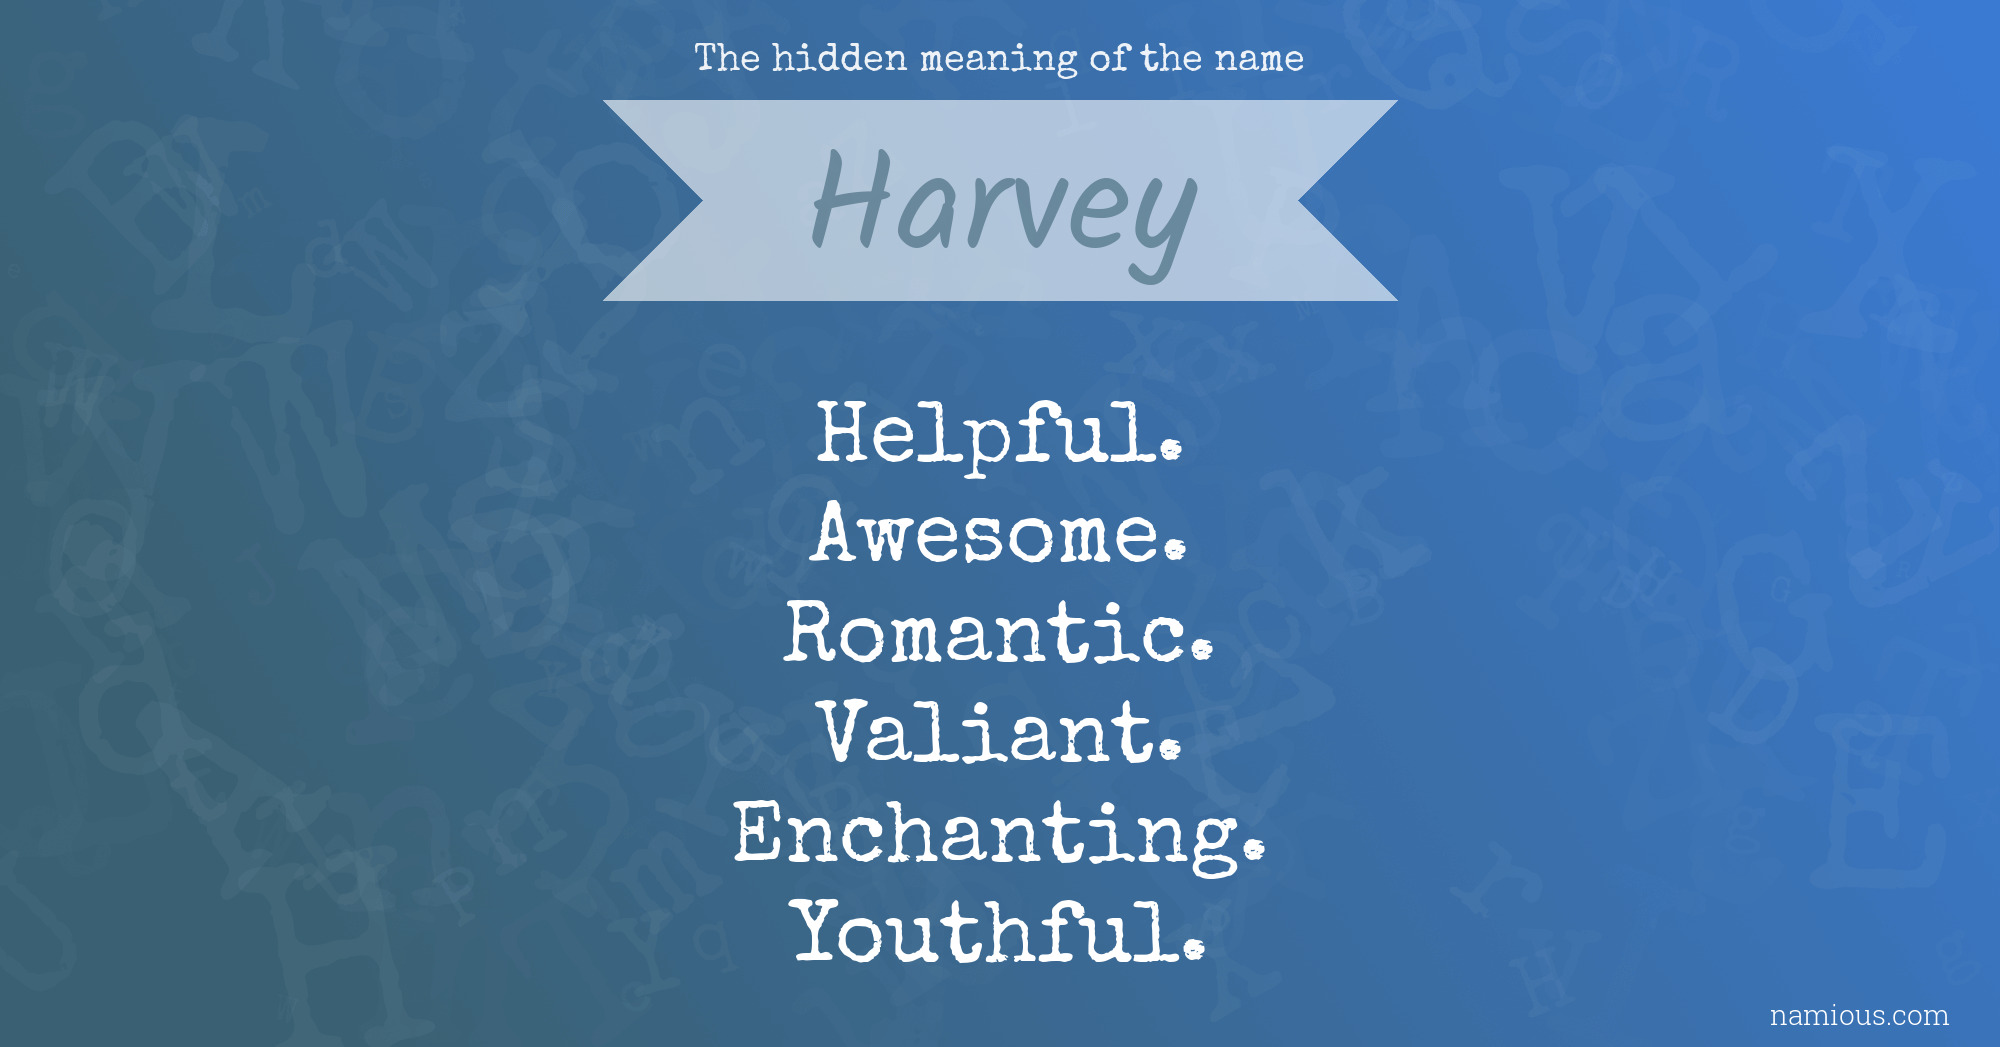 The hidden meaning of the name Harvey